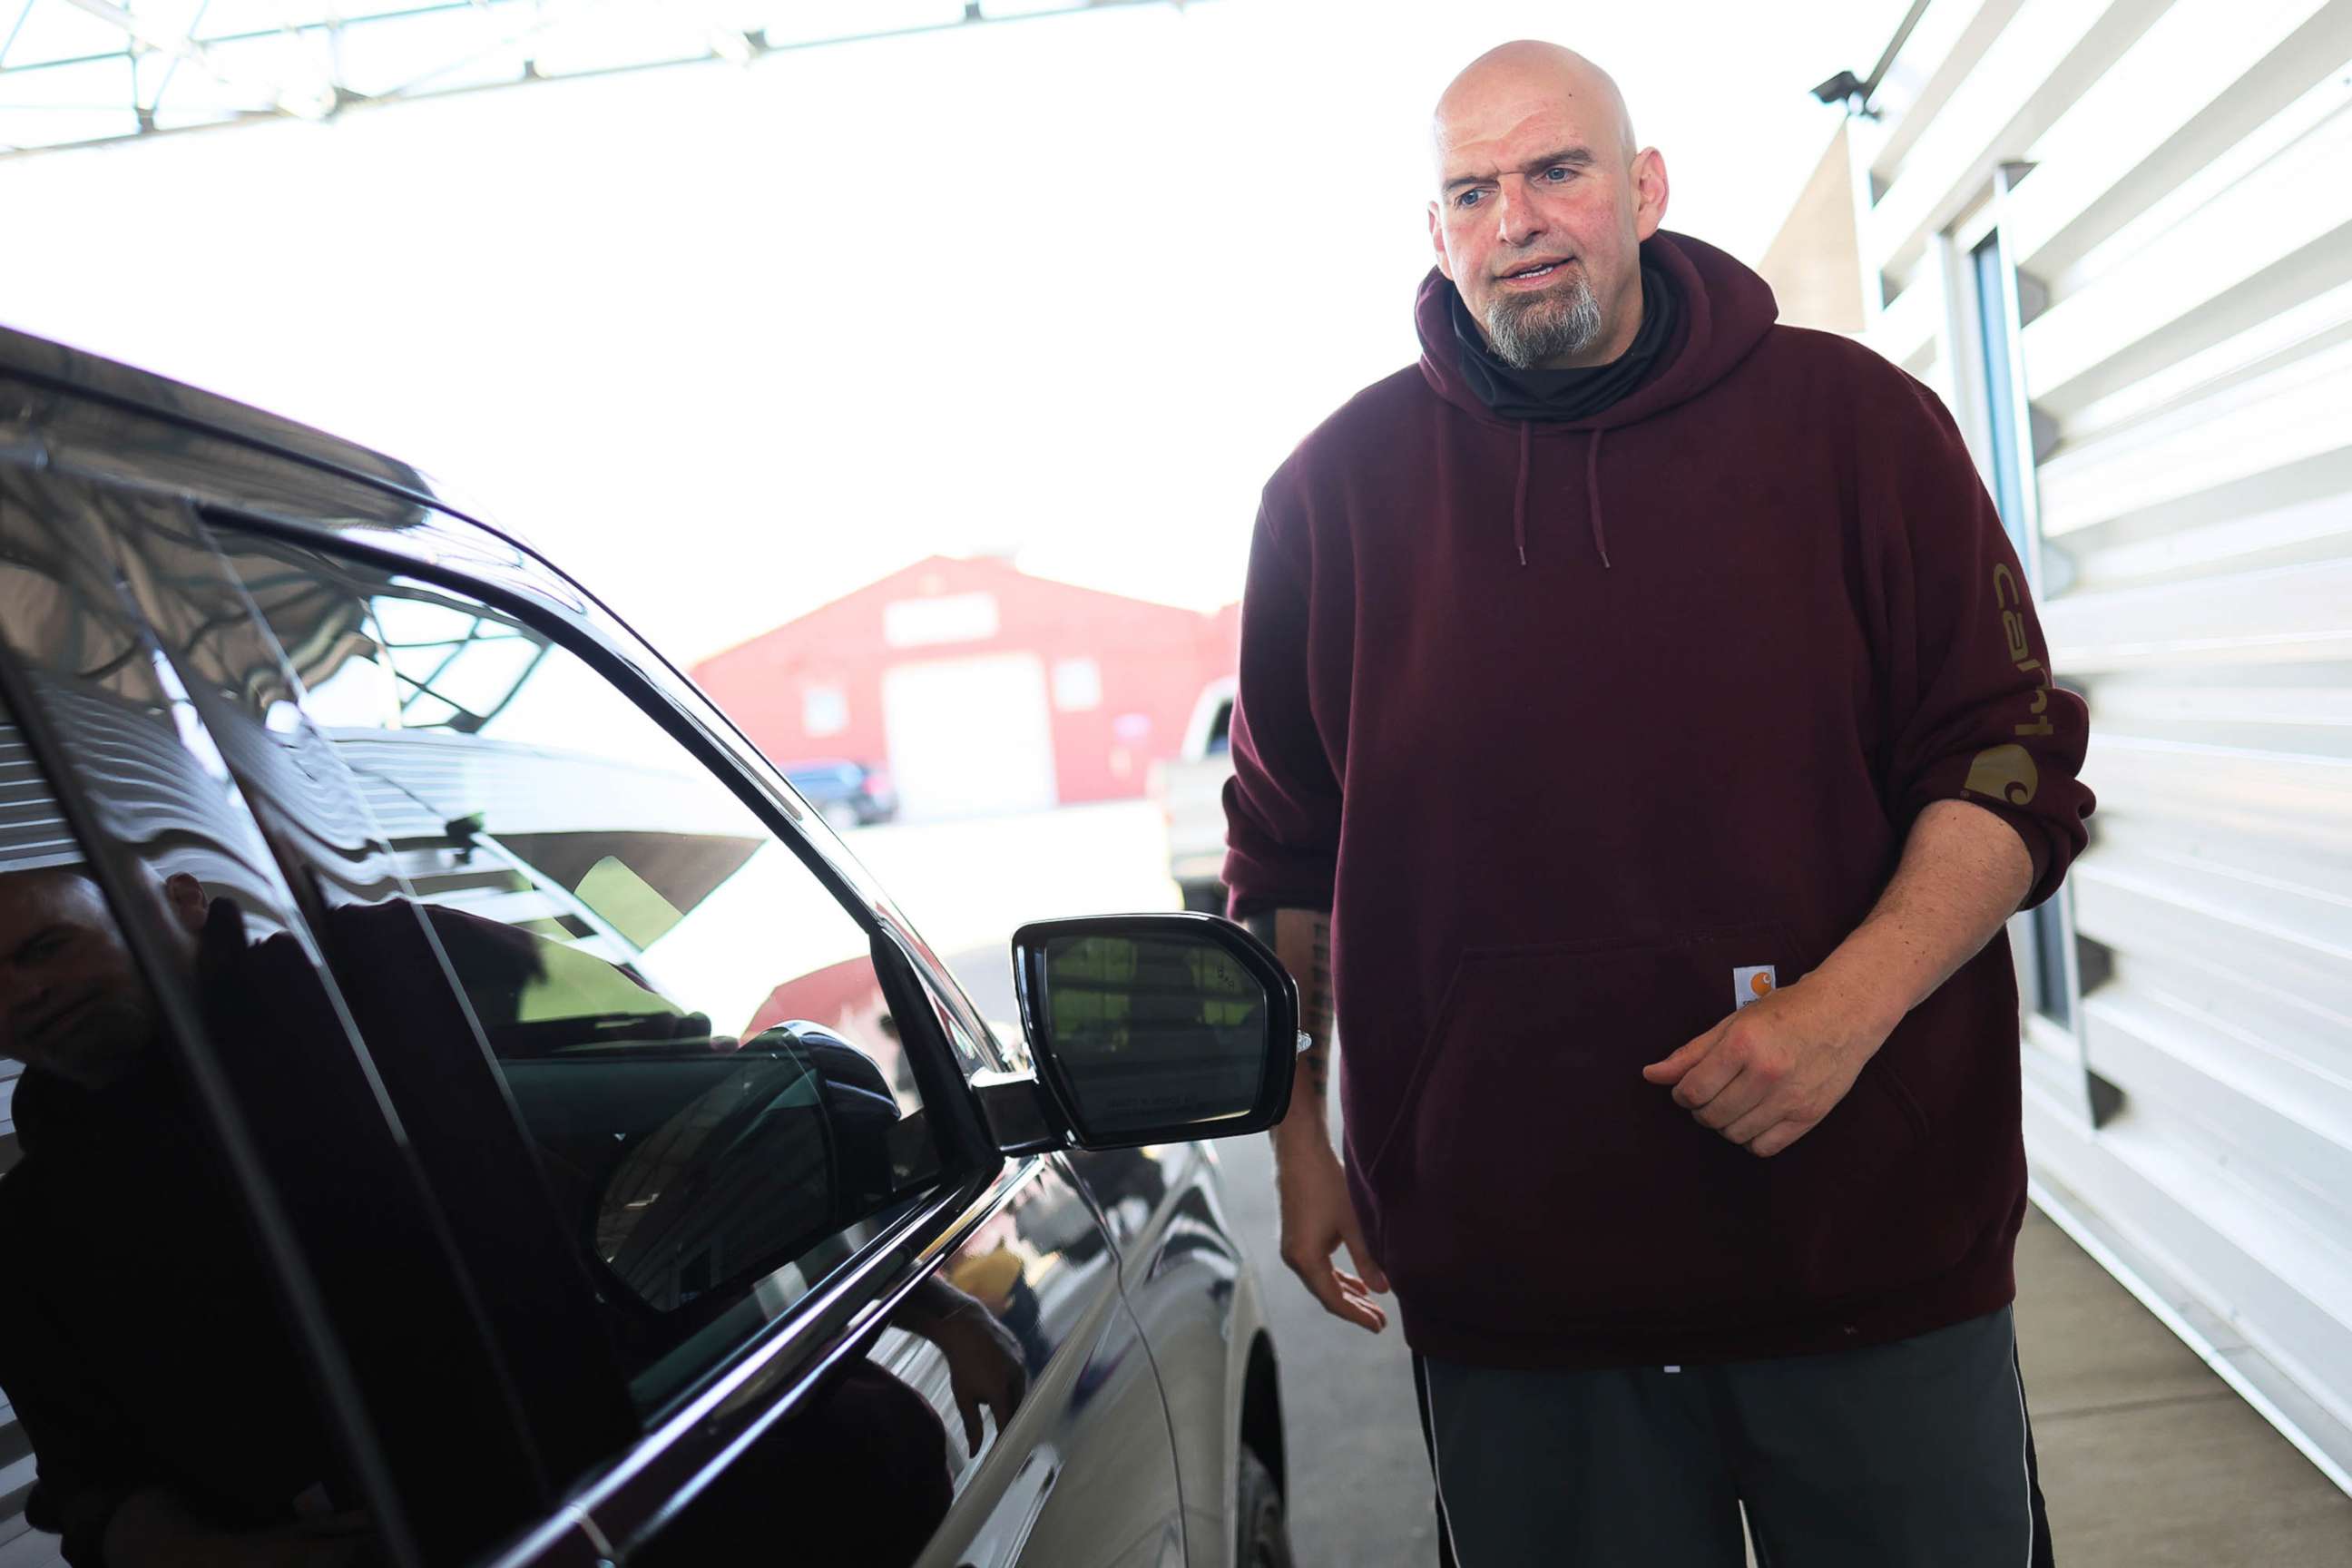 PHOTO: Pennsylvania Lt. Gov. John Fetterman campaigns for U.S. Senate at a meet and greet at Joseph A. Hardy Connellsville Airport in Lemont Furnace, Pa., May 10, 2022.